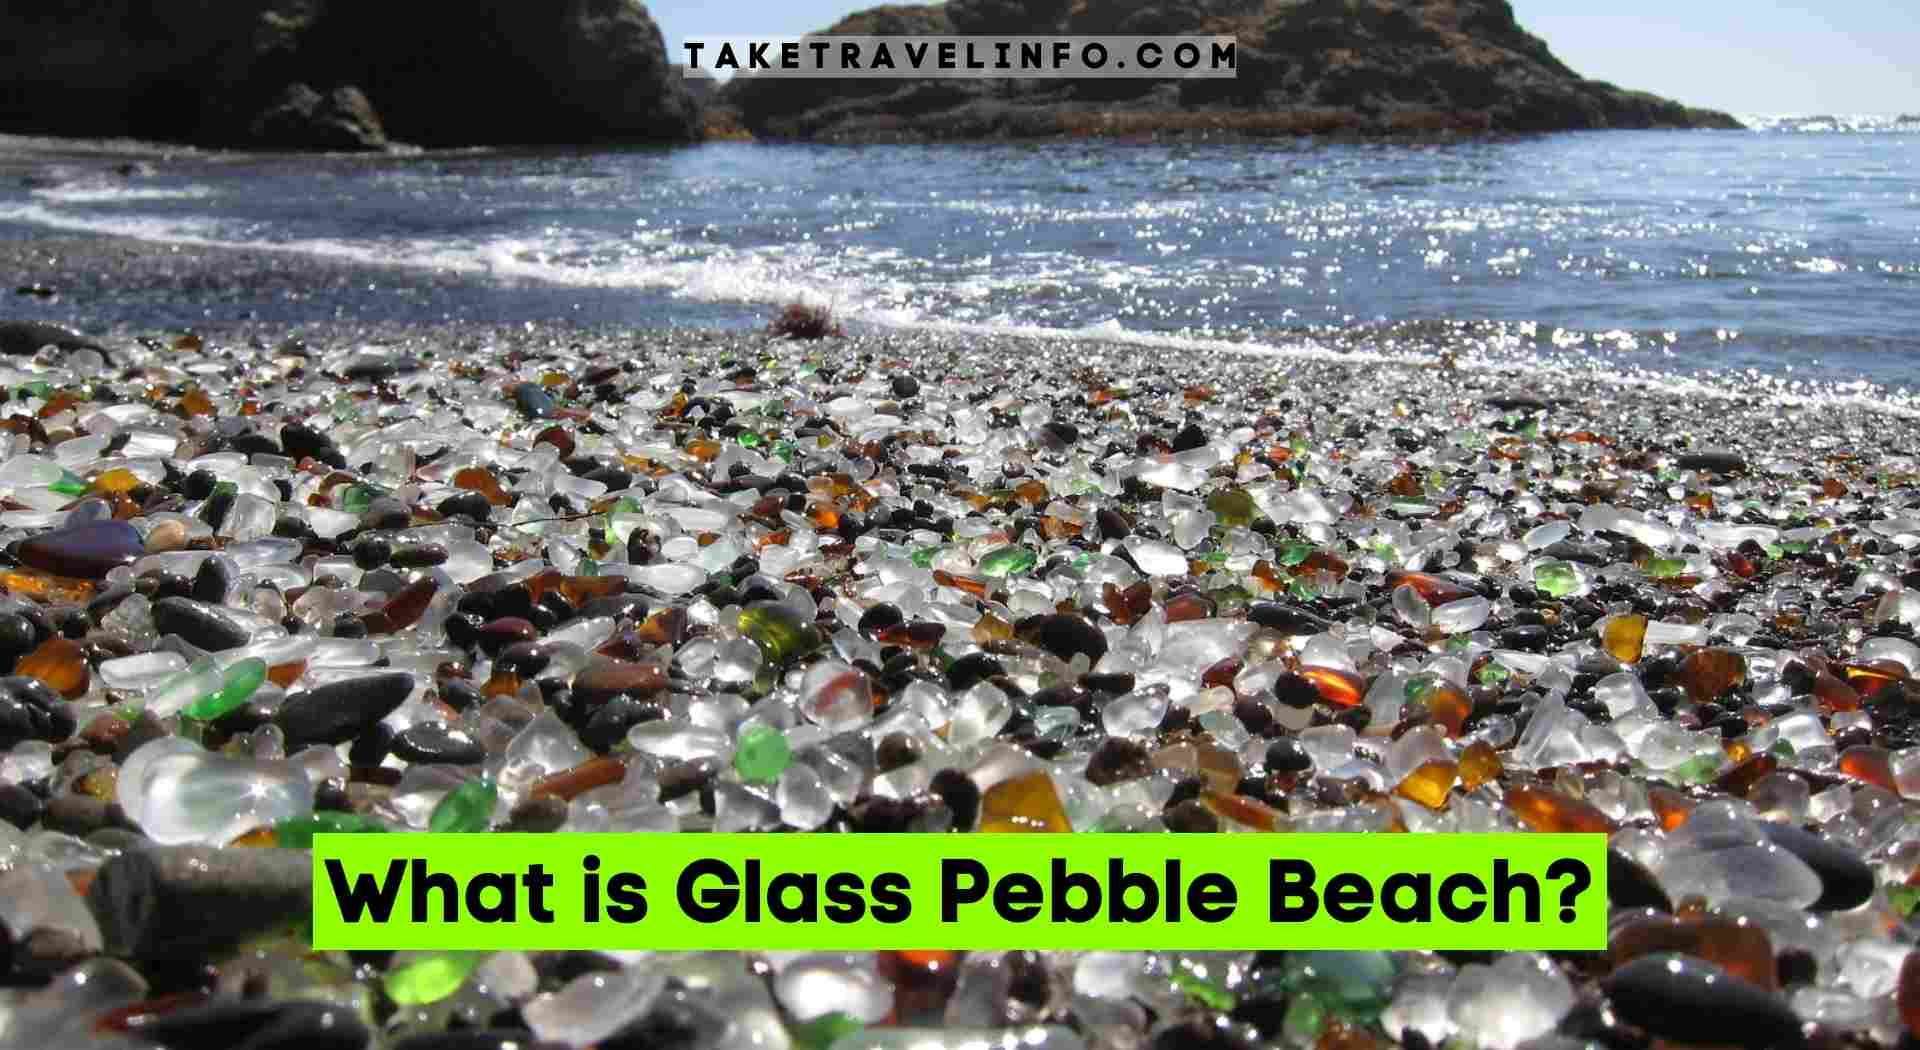 What is Glass Pebble Beach?